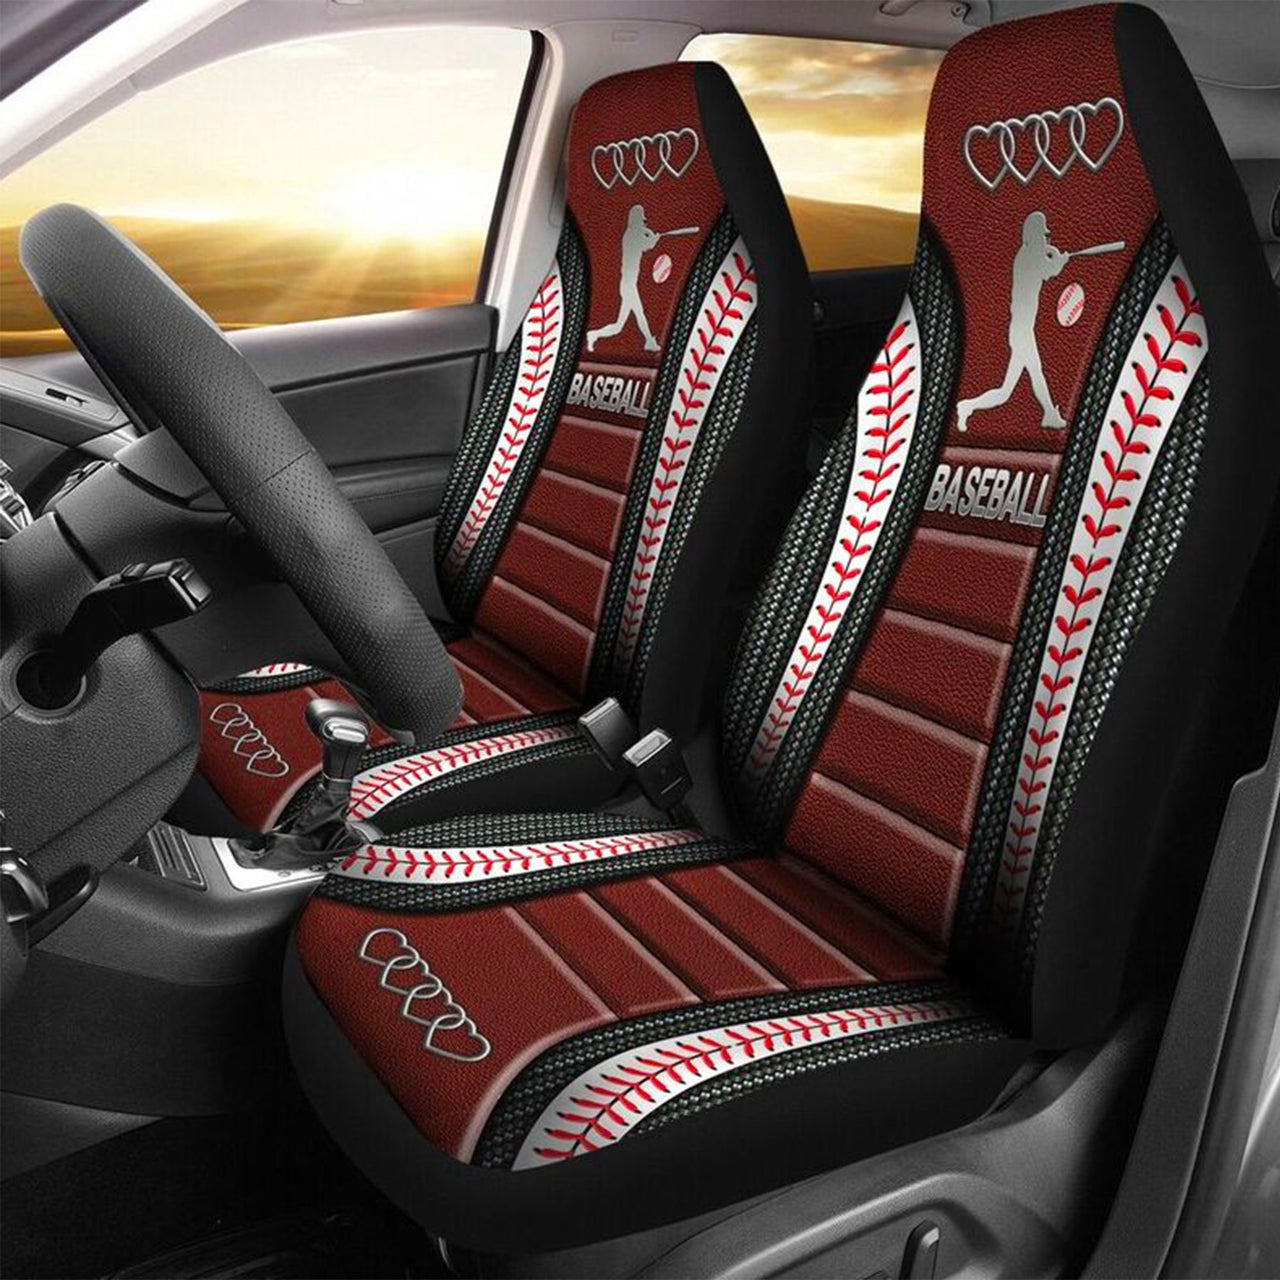 Custom Car Seat Cover Baseball Red Leather Seat Covers for Cars